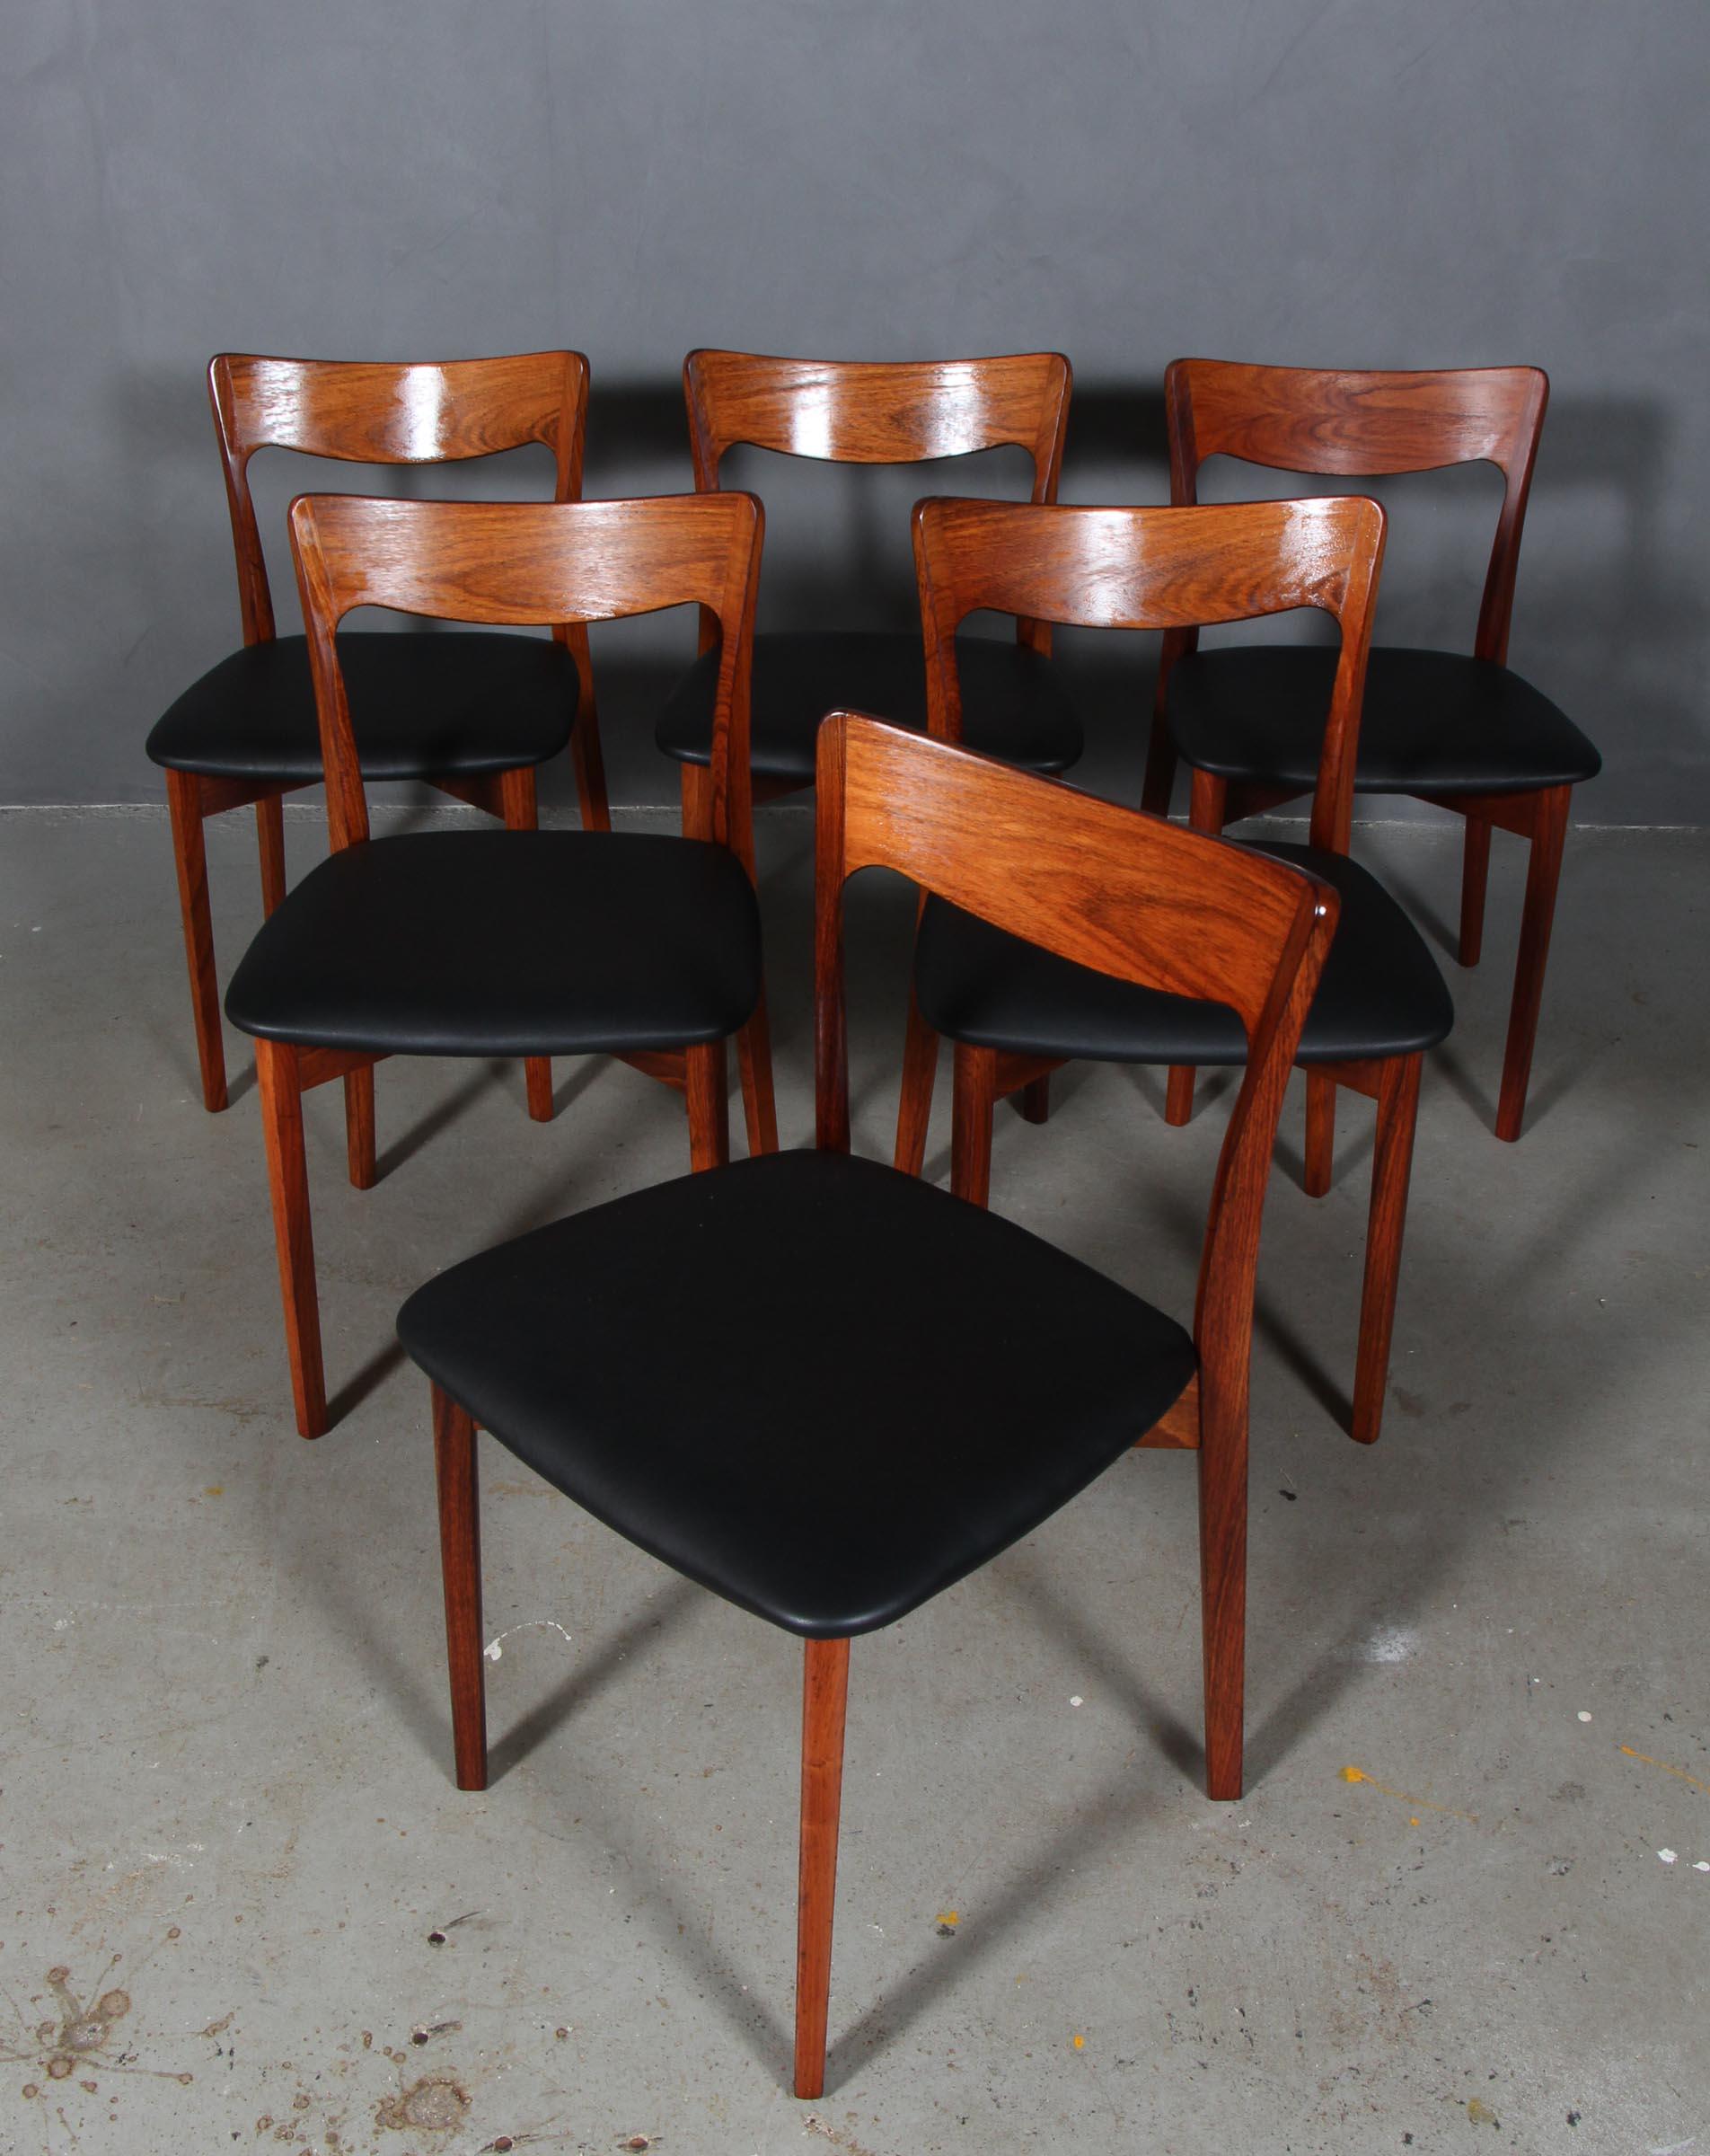 Harry Ostergaard set of six dining chairs in rosewood.

Seats new upholstered with black aniline leather.

Made by Randers Møbelfabrik.